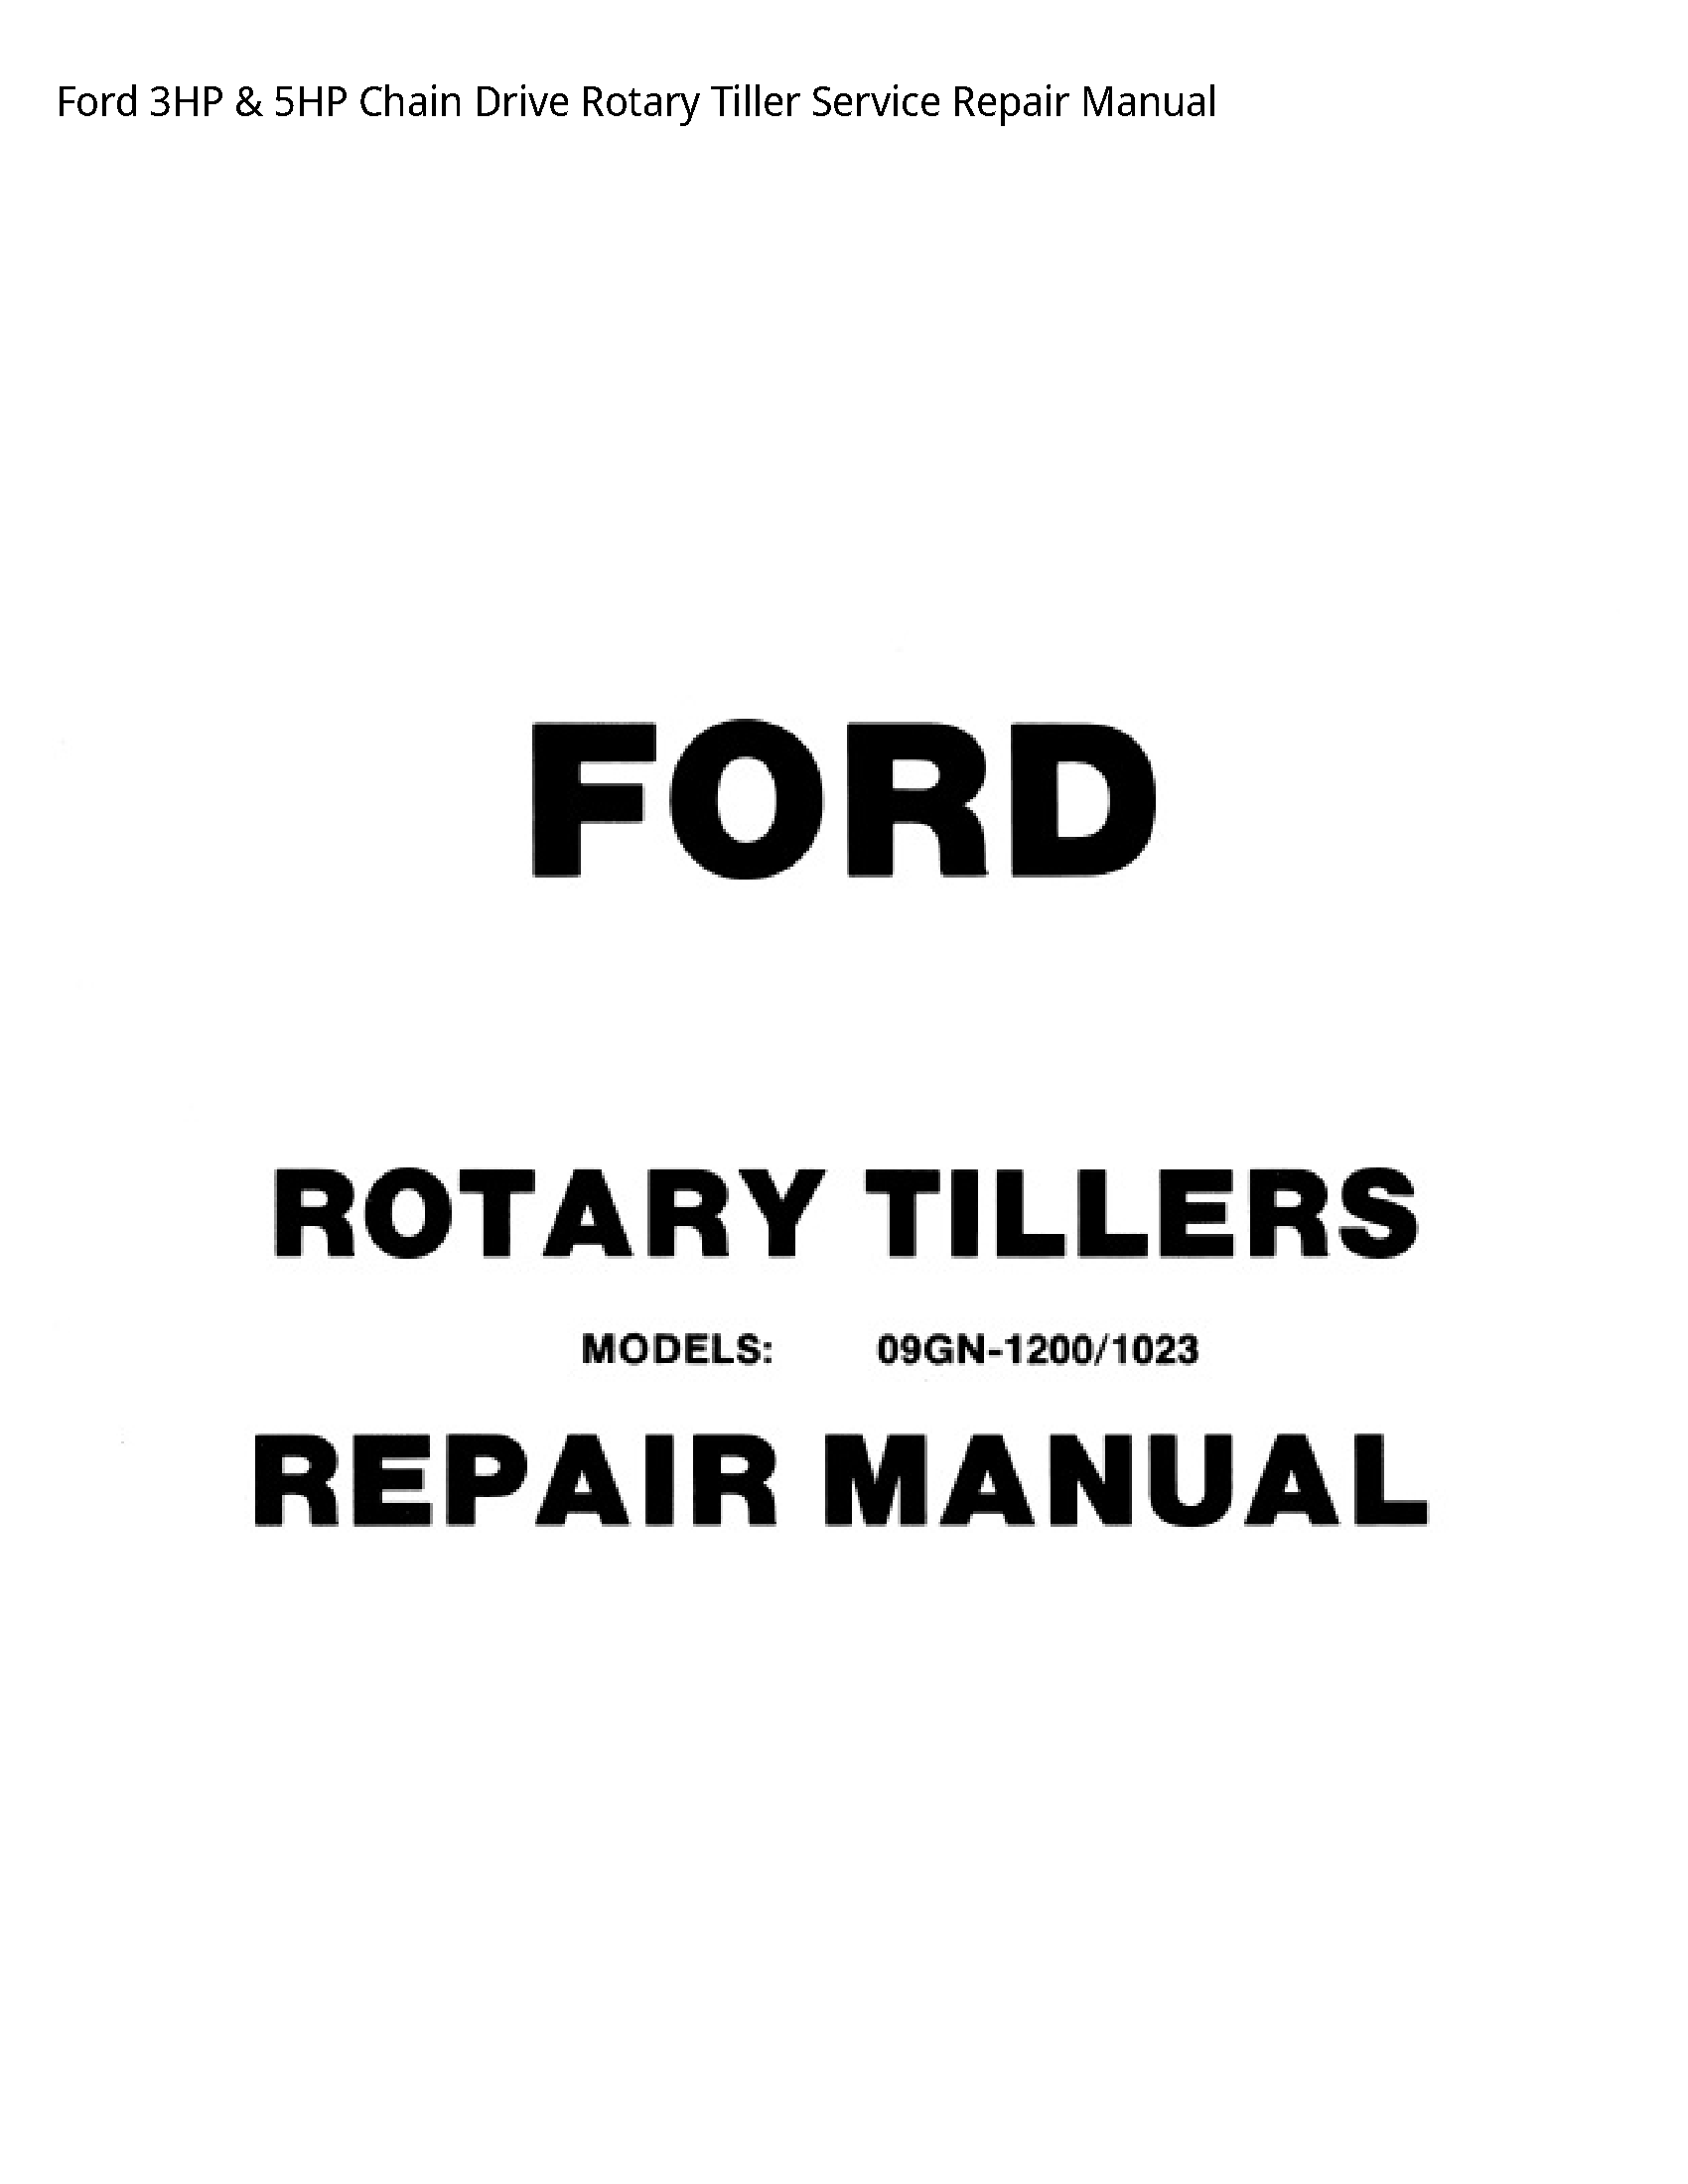 Ford 3HP Chain Drive Rotary Tiller manual